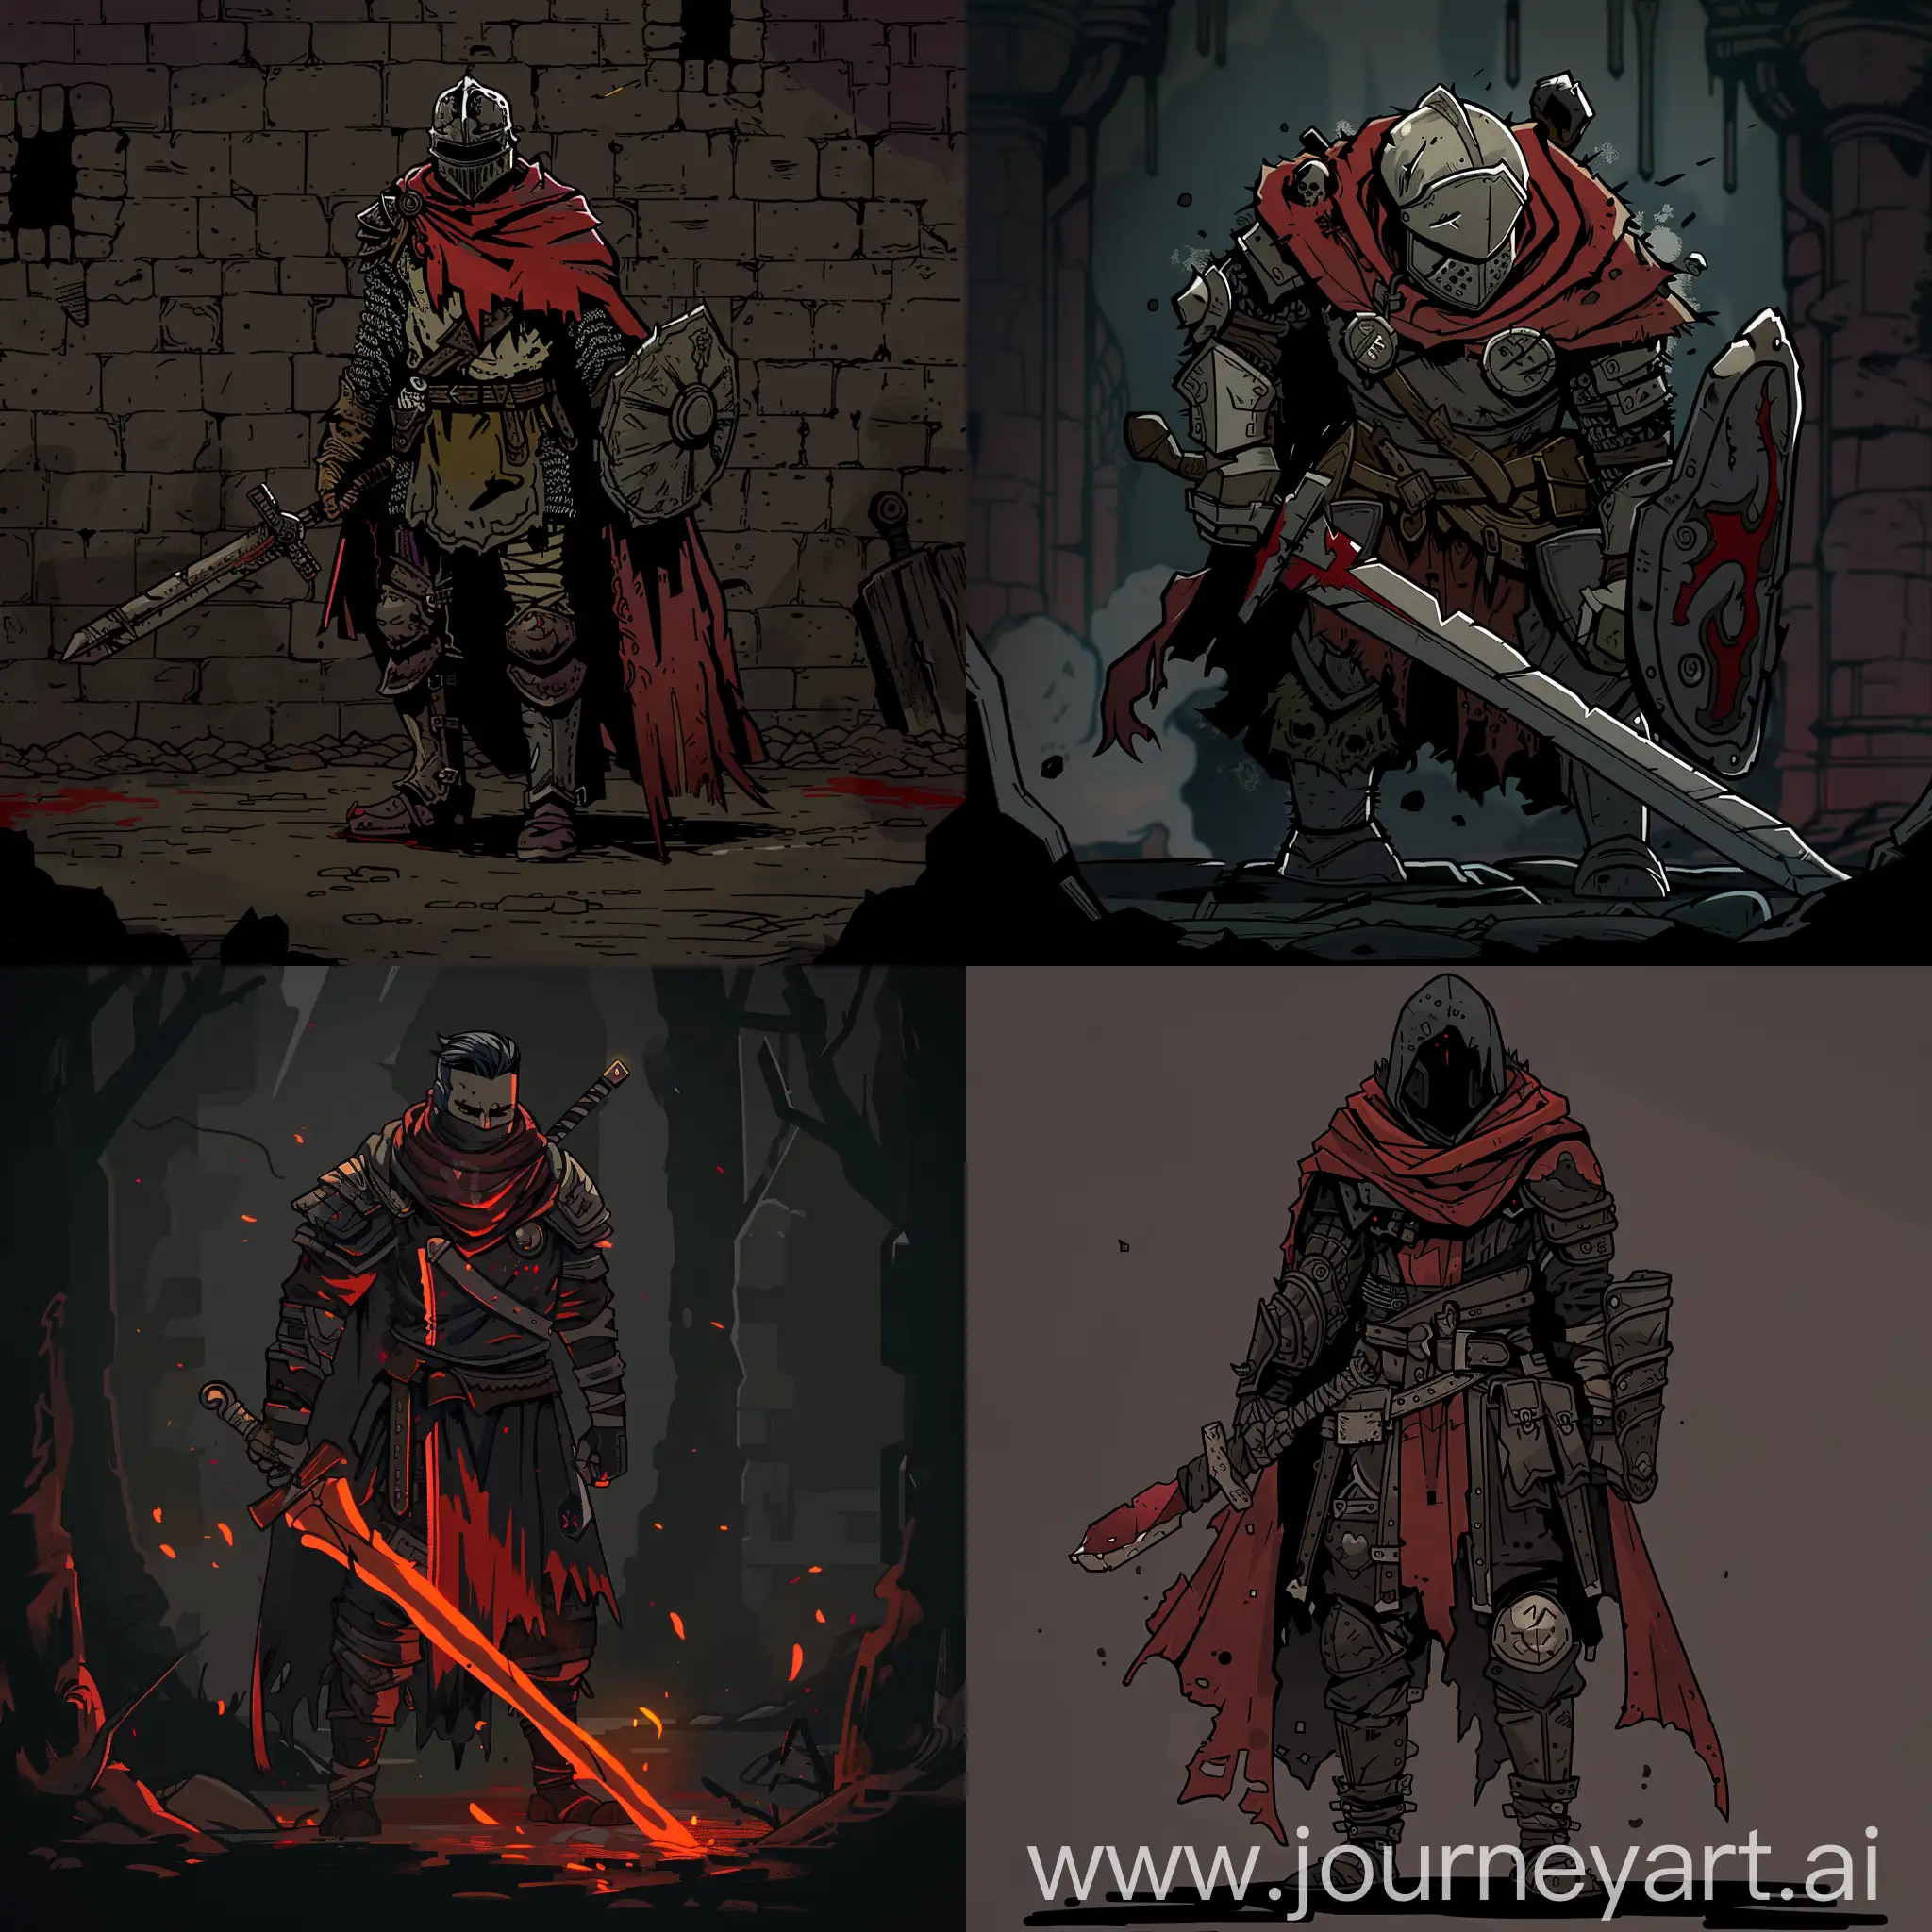 a side scroller character, warrior, in the style of darkest dungeon